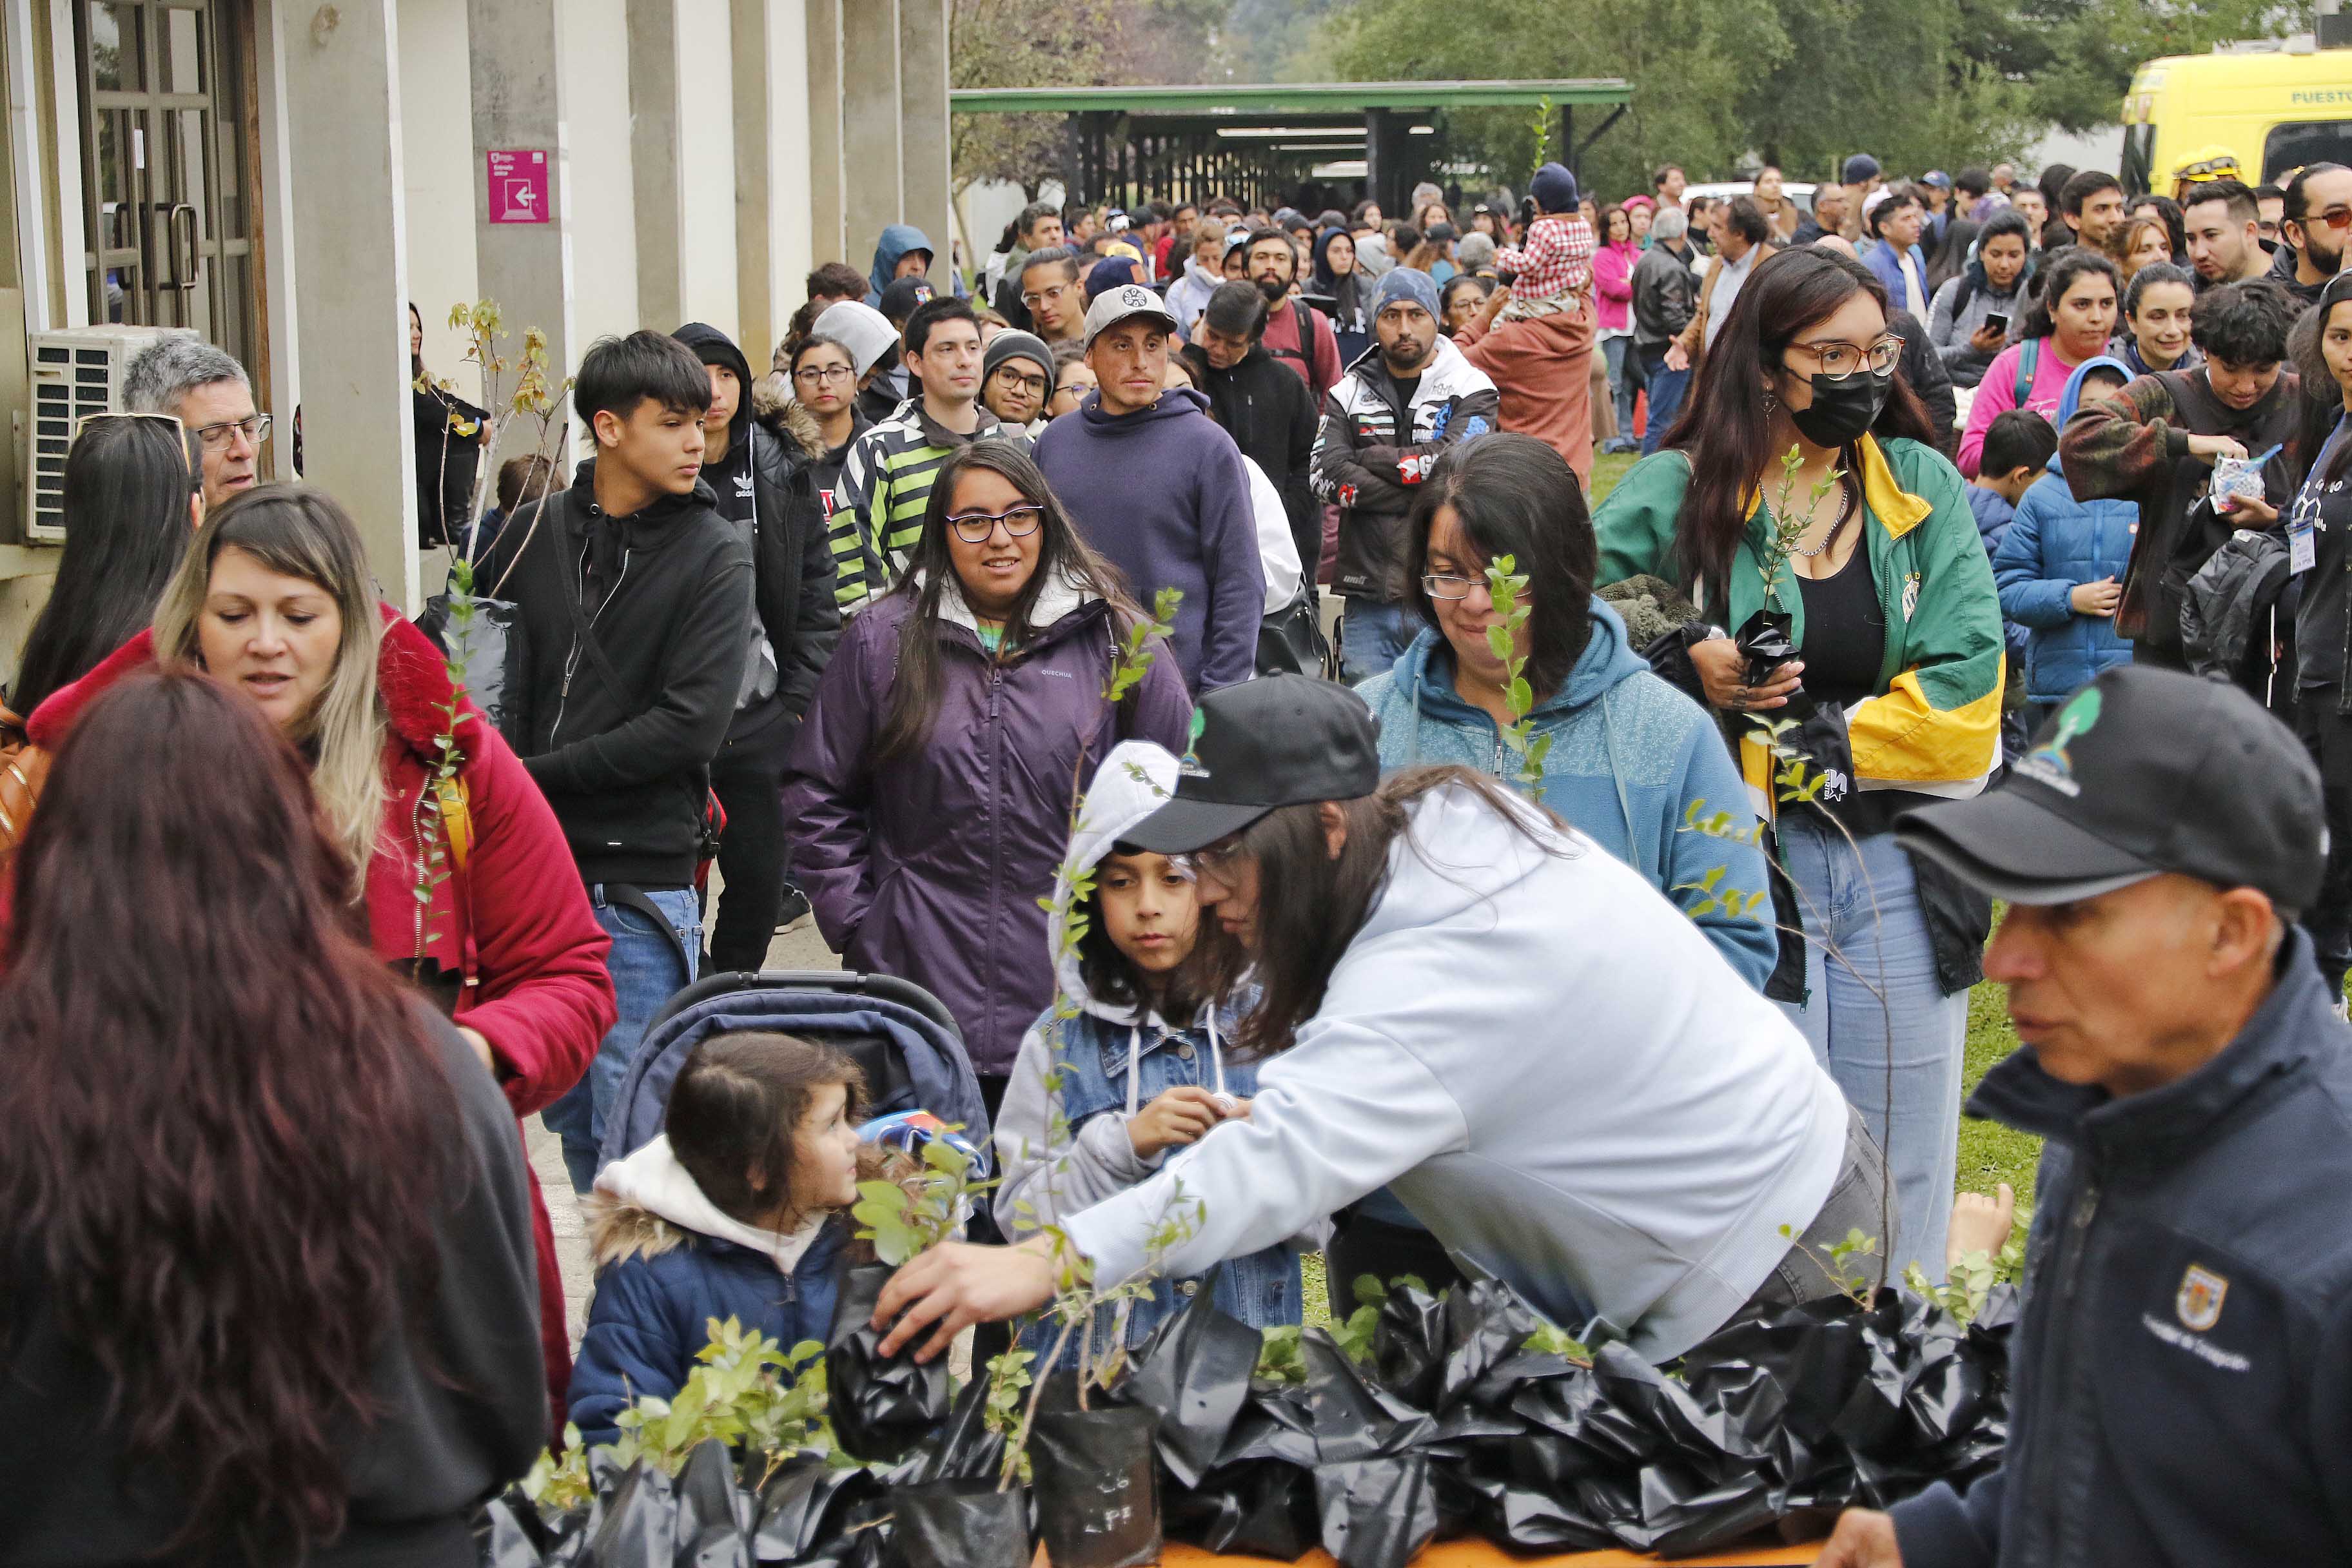 UdeC Forest Sciences has provided over 2,500 native tree plants to the community